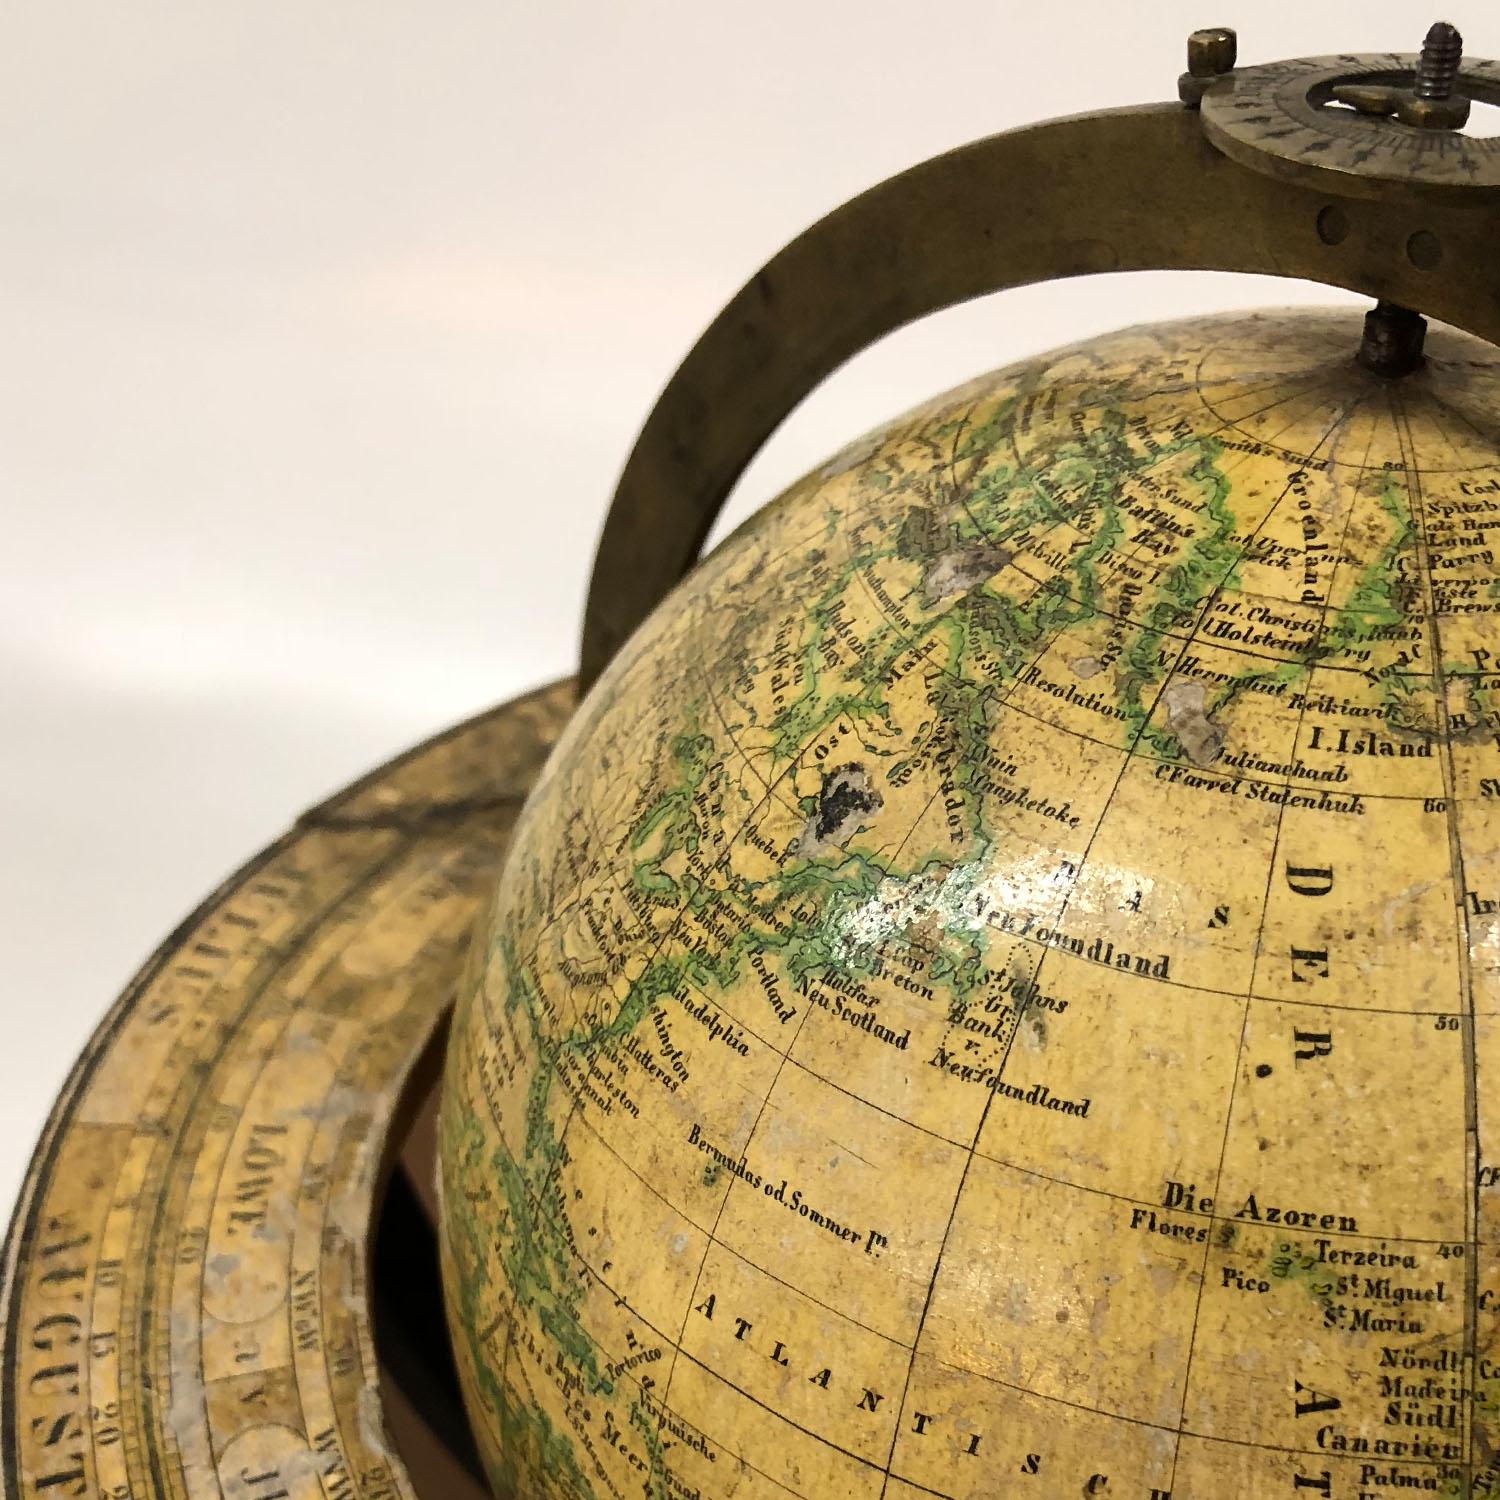 Small globe standing on a tripod base with brass meridian and a ring with zodiac signs and calendar. Located and dated on the Globe “Weimar 1843, Geograph. (isches) Institut. Verfertigt v. J. C. Gorick.”. Small imperfections on the map, especially